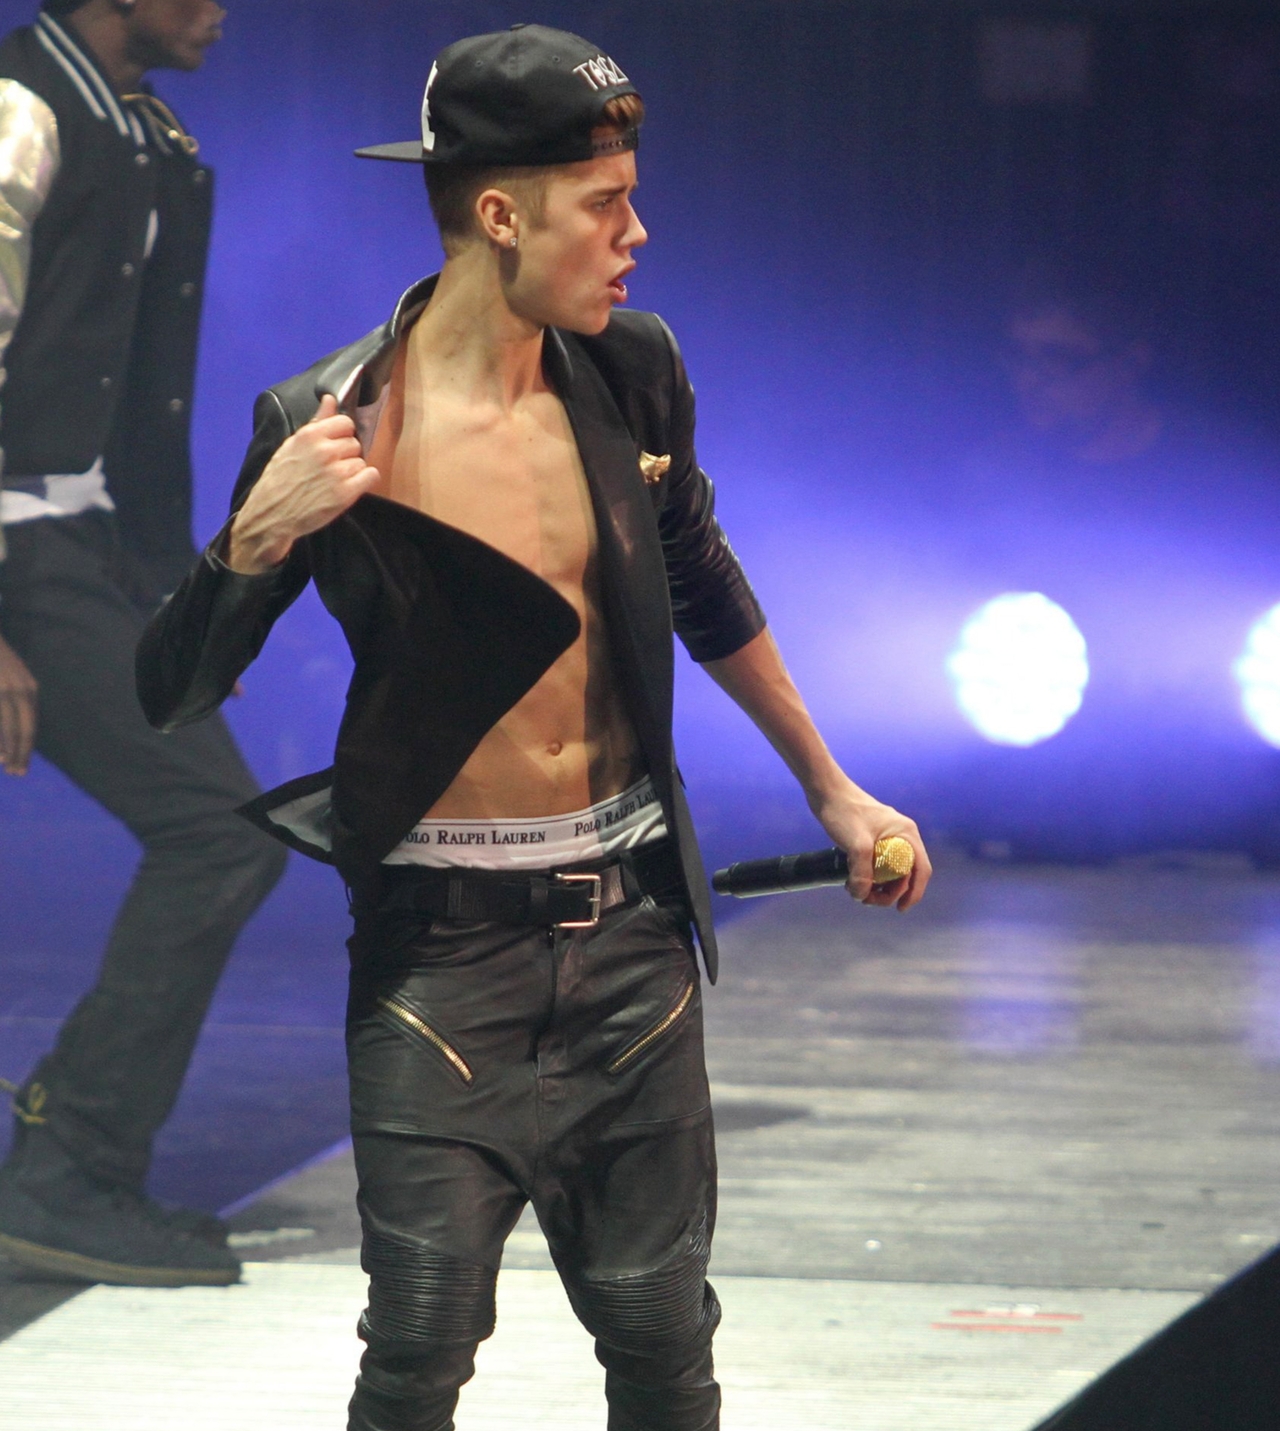 Bieber Exclusive: Justin Bieber Shirtless during Live Performance at MSG, NYC